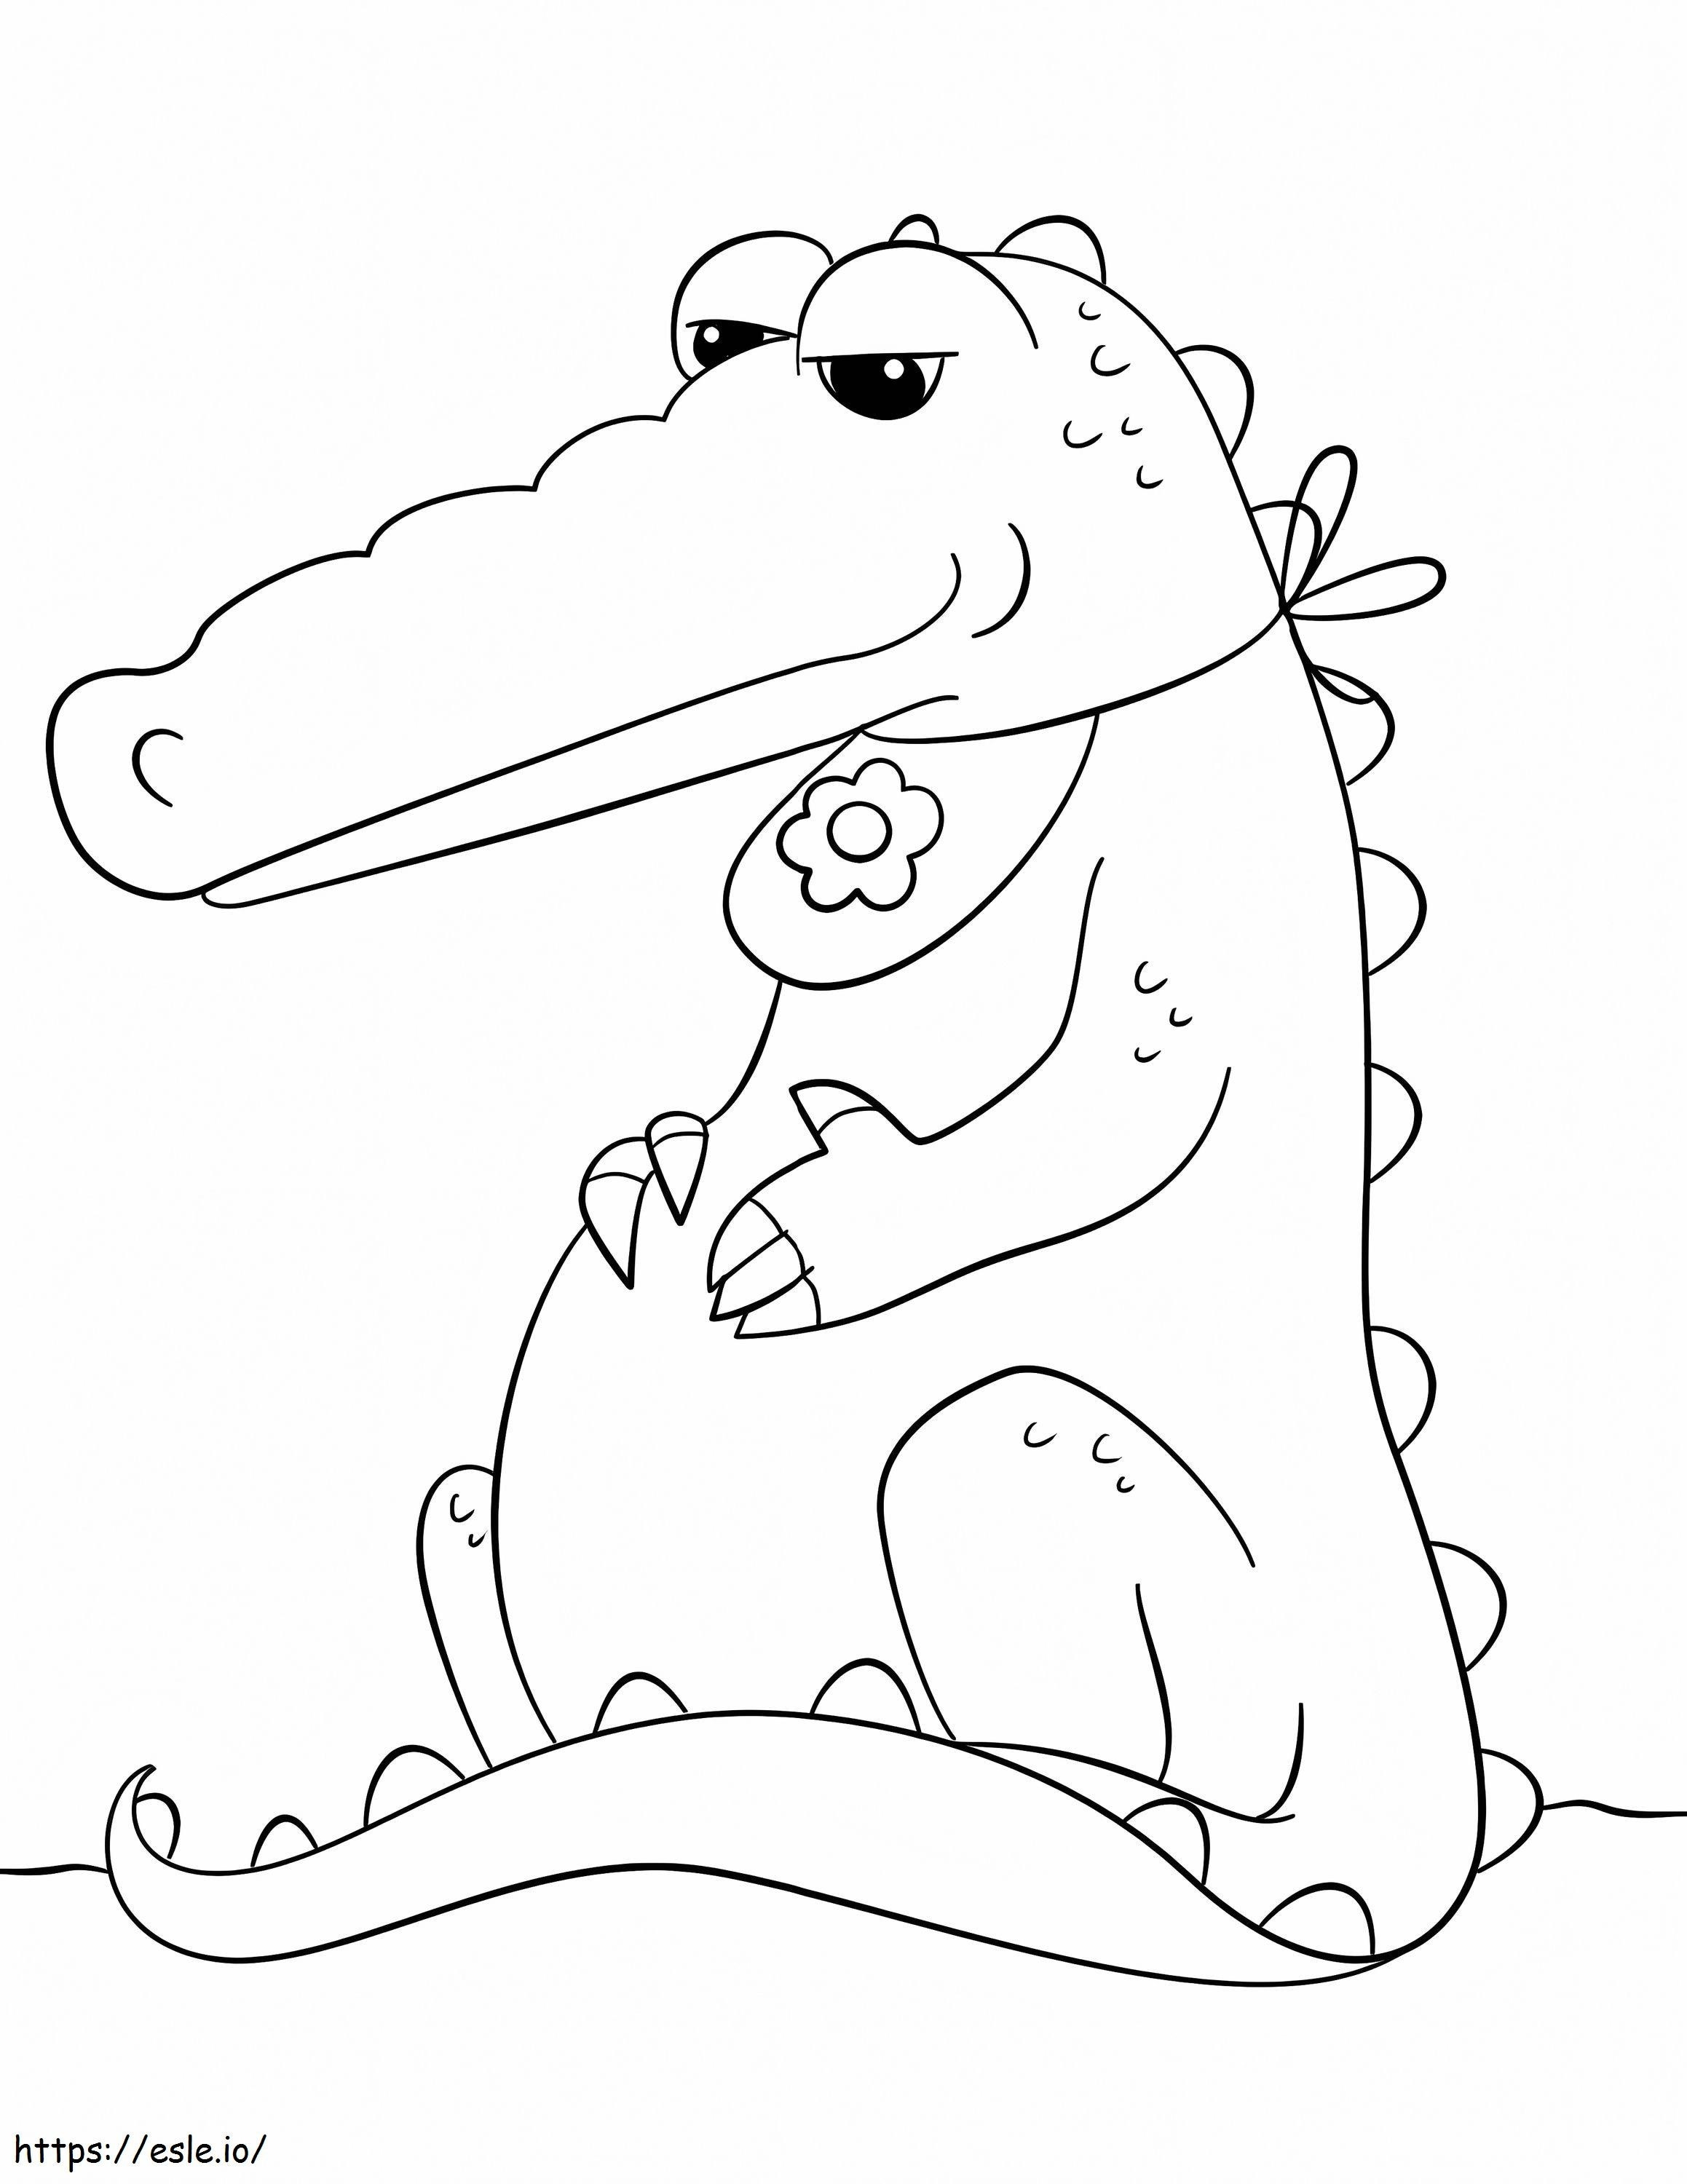 Full Alligator With Bib coloring page